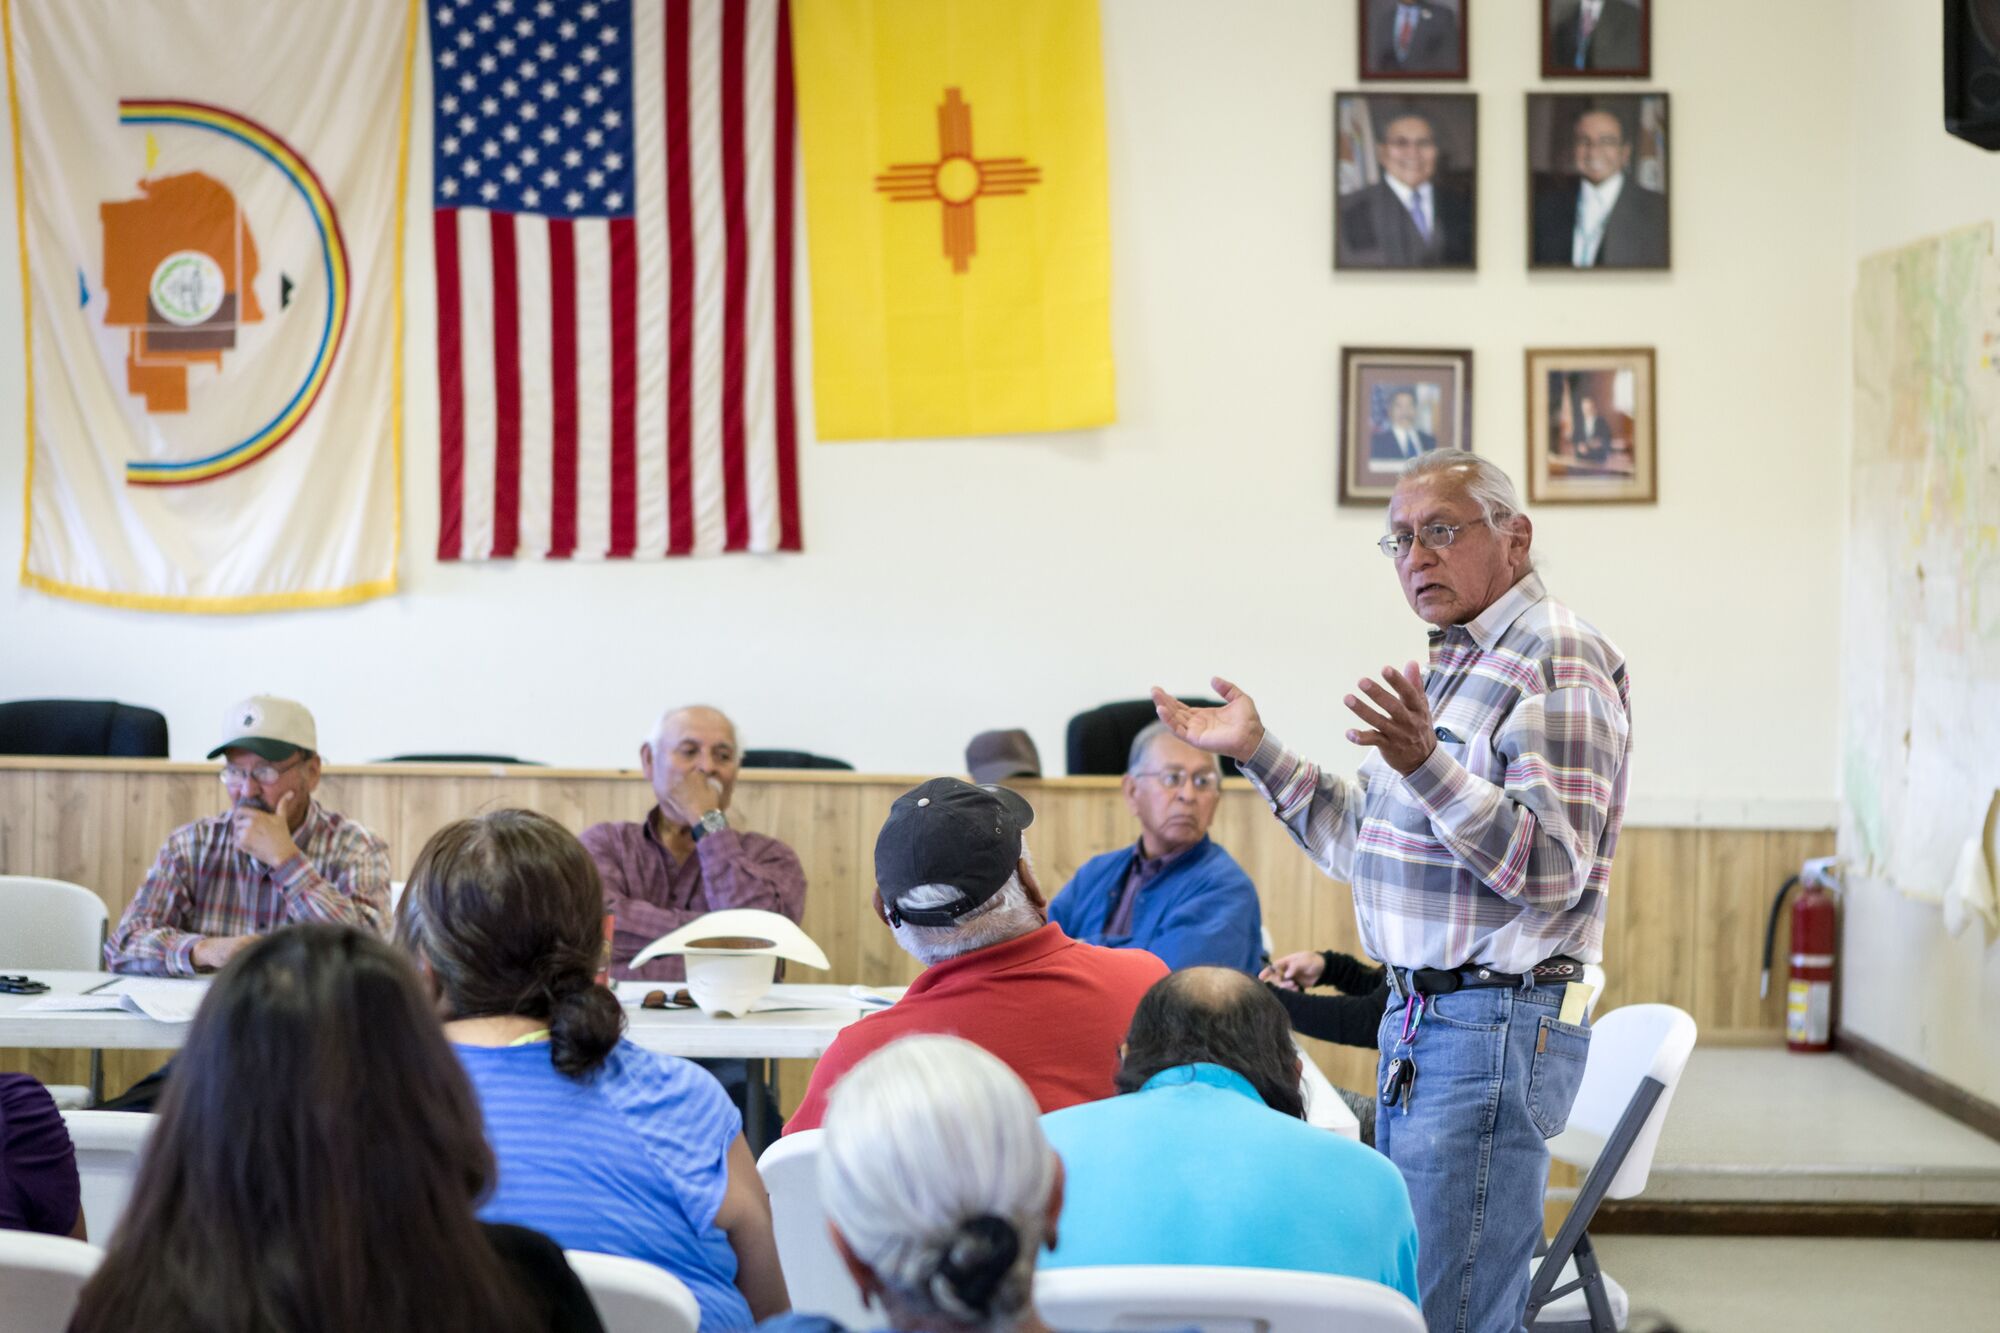 Navajo community leader Daniel Tso speaks at a meeting at the chapter house in Counselor New Mexico where the Bureau of Land Management was hearing public comments on proposed new sites for leasing rights to additional drilling in the San Juan Basin.